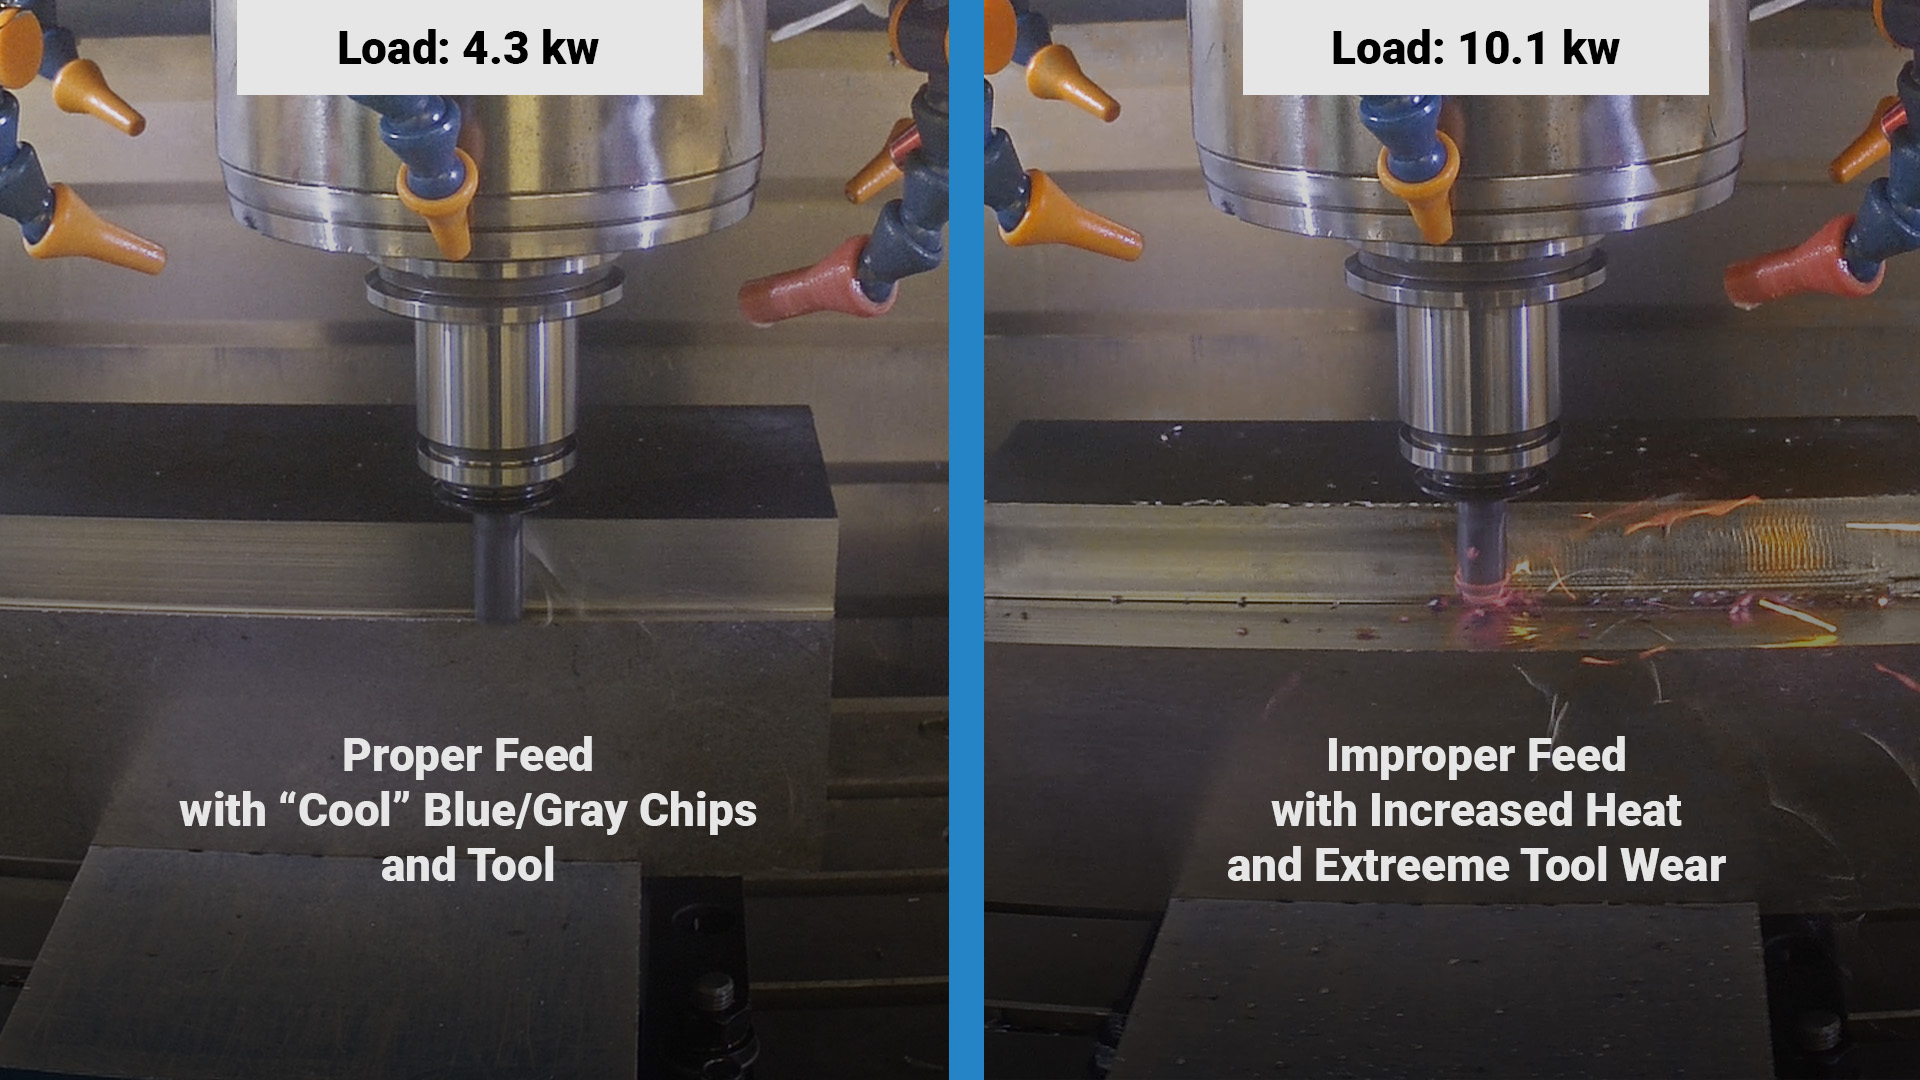 Comparing Feed and Load settings